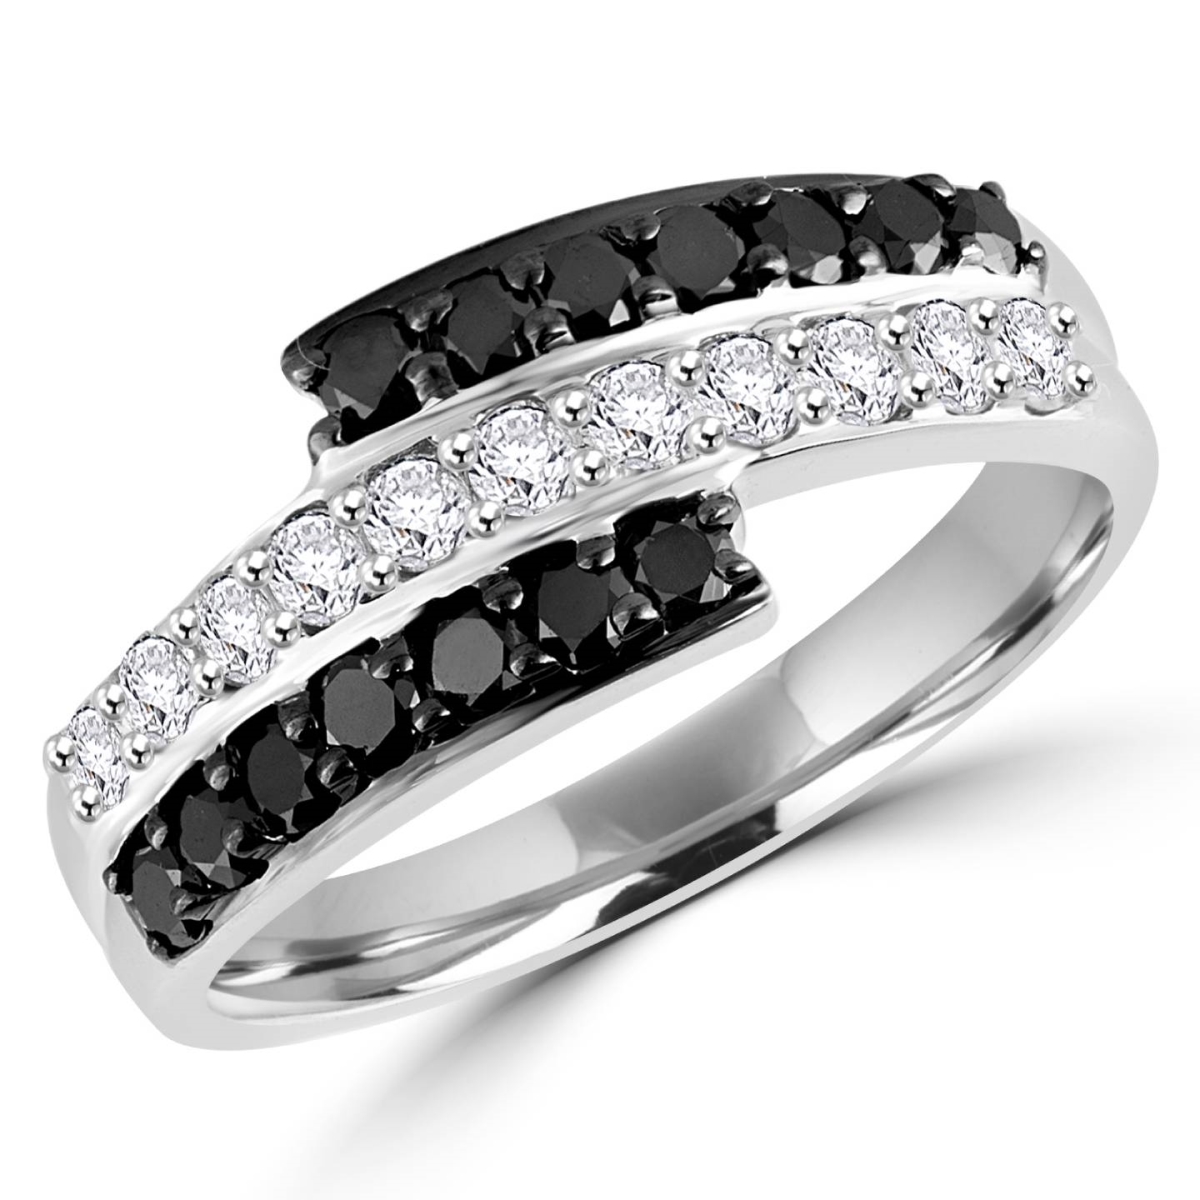 Picture of Majesty Diamonds MDR140130-3.5 0.75 CTW Black & White Round Diamond Fashion Cocktail Ring in 14K White Gold - Size 3.5